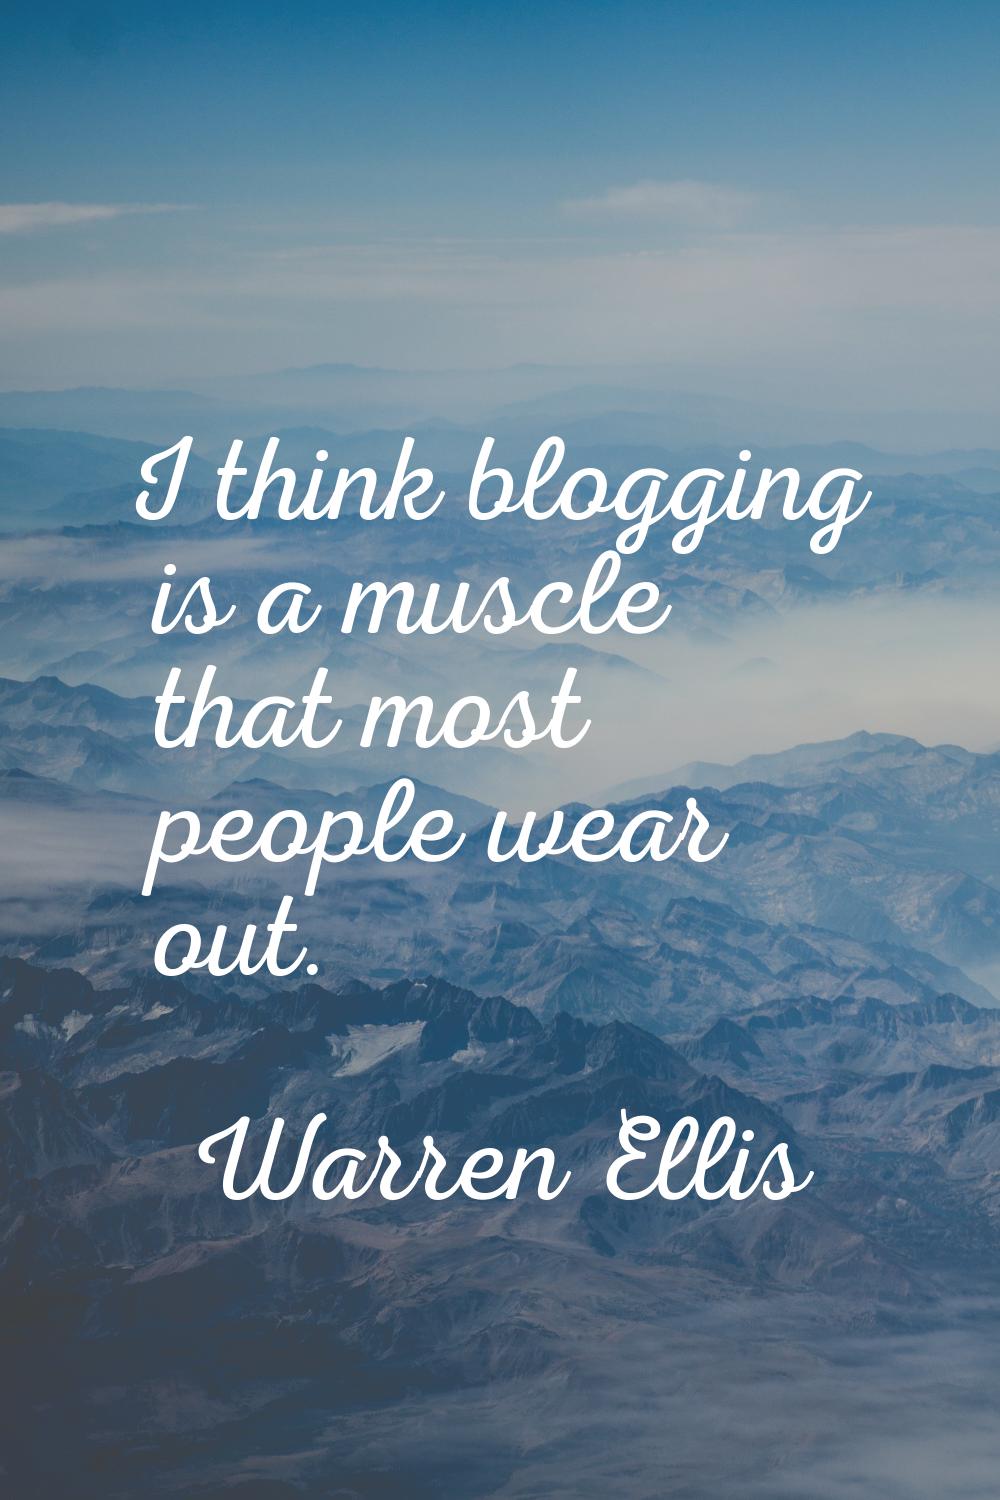 I think blogging is a muscle that most people wear out.